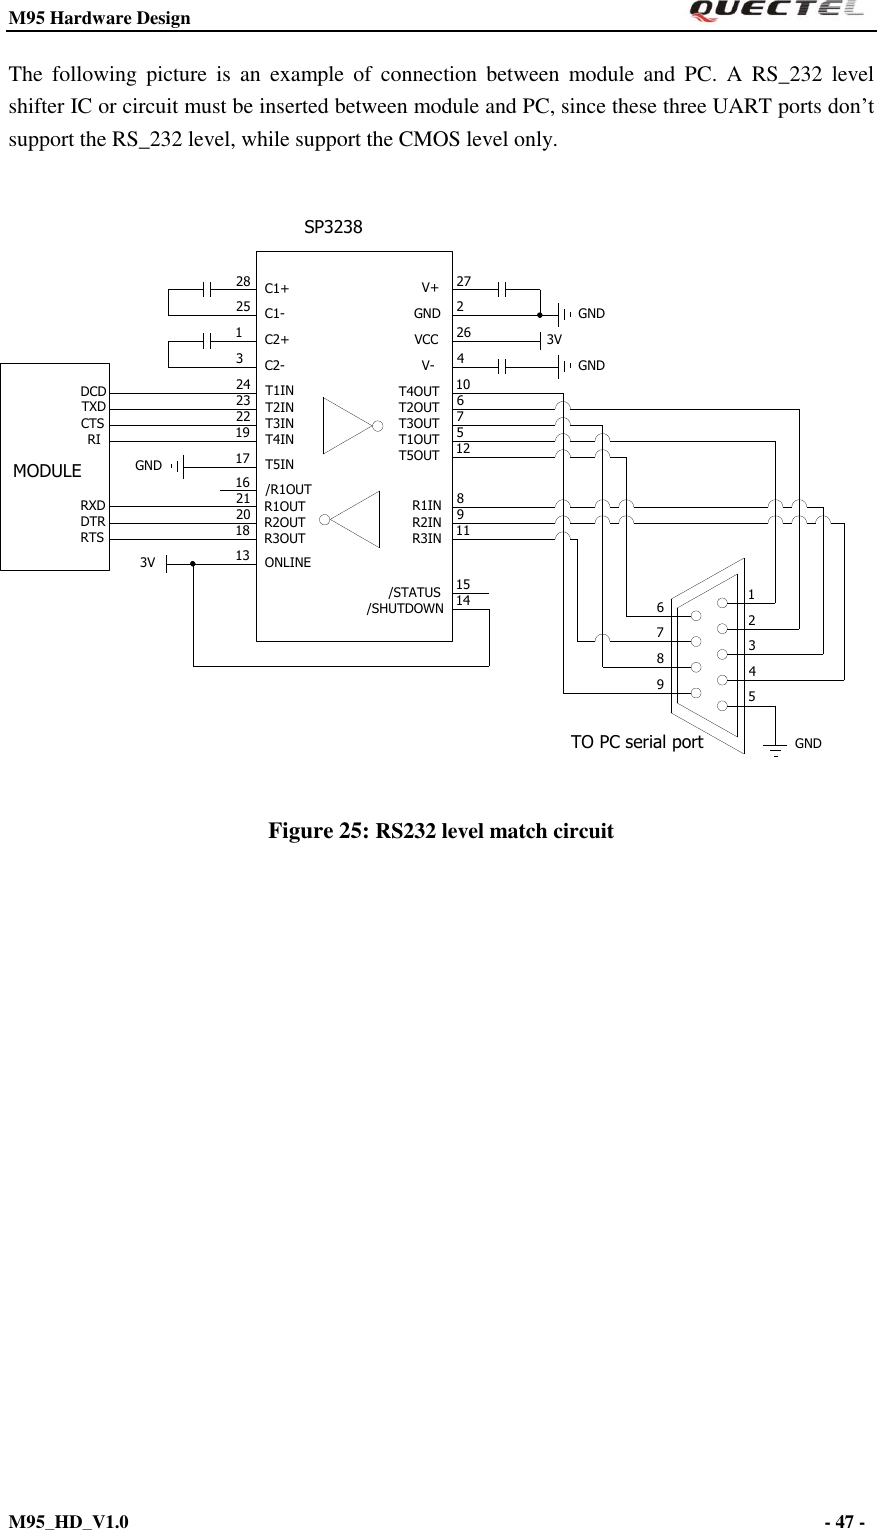 M95 Hardware Design                                                       M95_HD_V1.0                                                                - 47 -    The  following  picture  is  an  example of  connection  between  module  and  PC.  A  RS_232  level shifter IC or circuit must be inserted between module and PC, since these three UART ports don’t support the RS_232 level, while support the CMOS level only.    98765432115148911125761042622713182021161719222324312528GNDTO PC serial portSP32383VGNDGNDT5OUT/SHUTDOWNV+GNDV-VCCT4OUTT2OUTT3OUTT1OUTR3INR2INR1IN/STATUS3V ONLINER1OUTR2OUTR3OUT/R1OUTGND T5INT4INT3INT2INT1INC2+C2-C1-C1+MODULERXDDTRRTSRICTSTXDDCD Figure 25: RS232 level match circuit                    